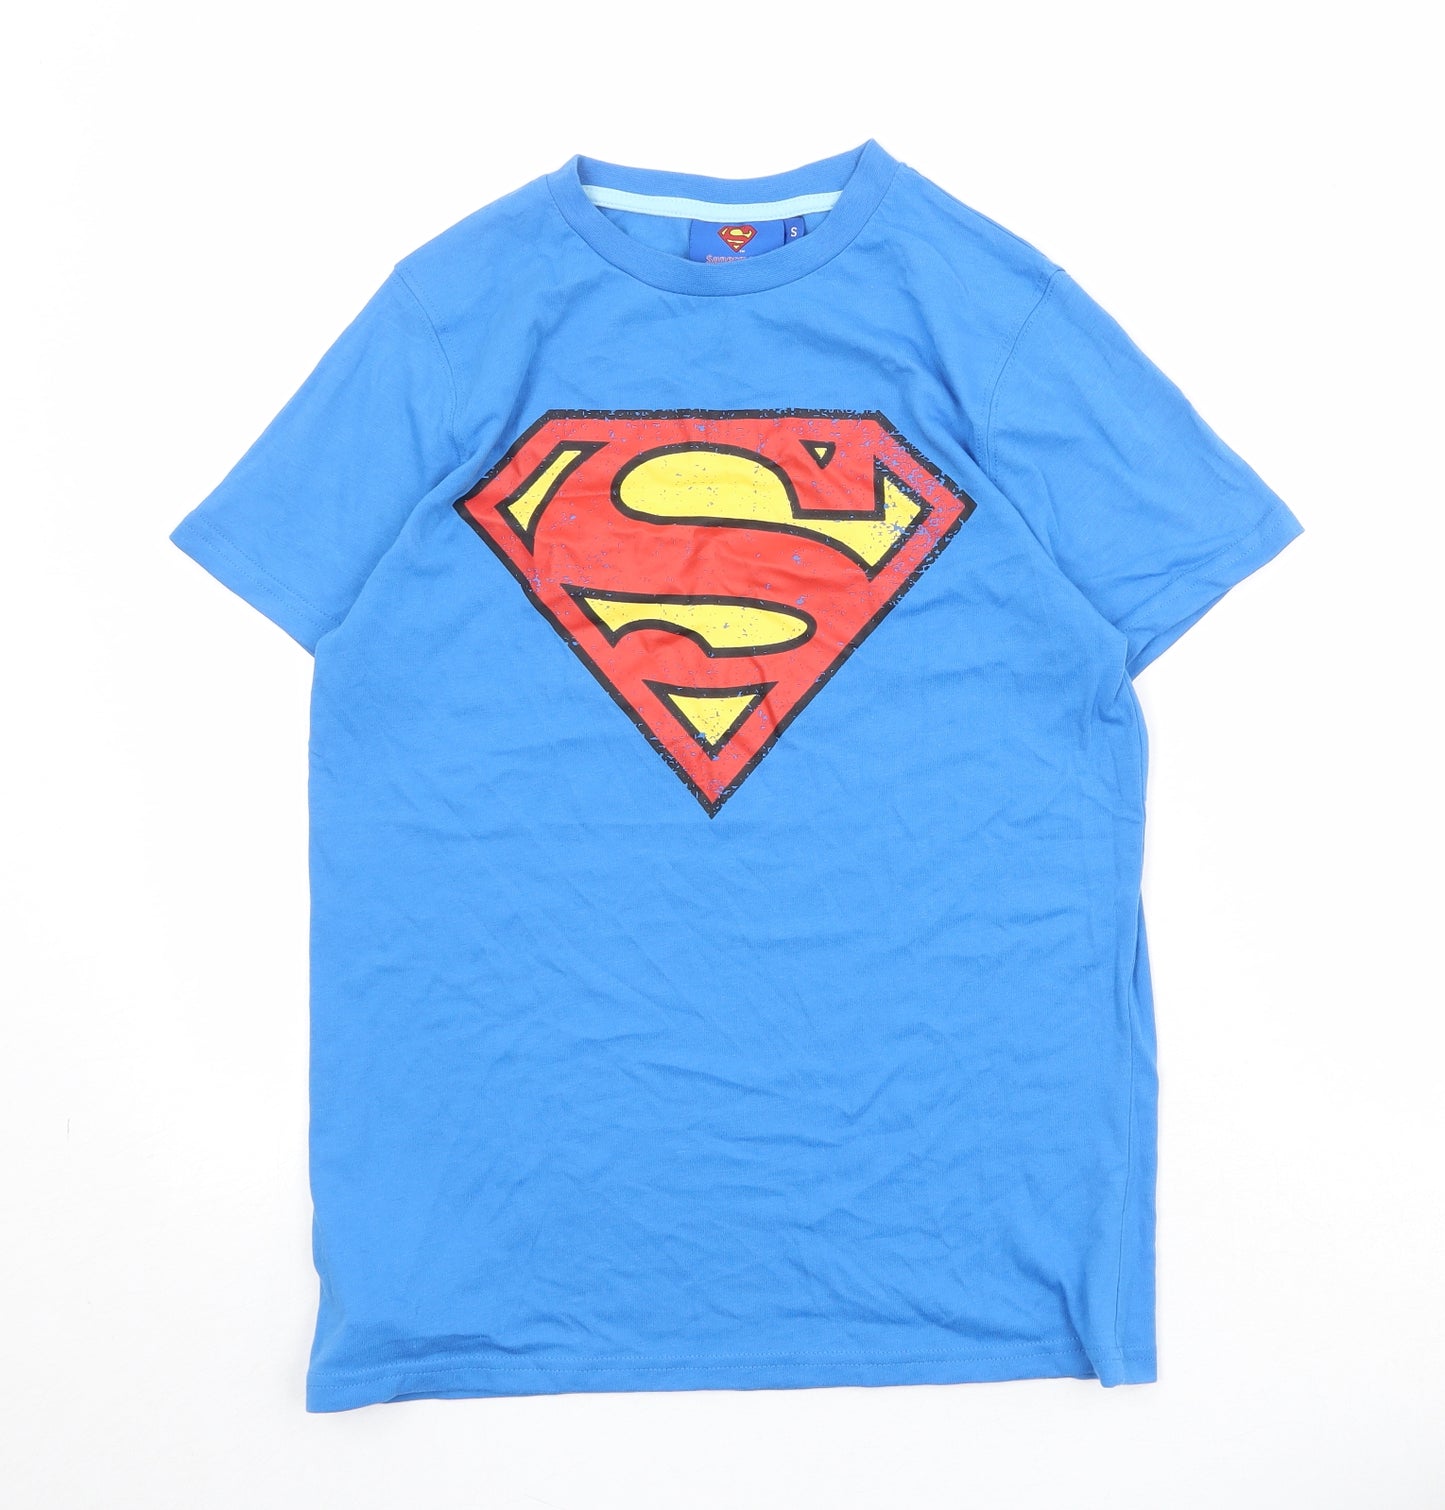 Superman Mens Blue Polyester T-Shirt Size S Round Neck